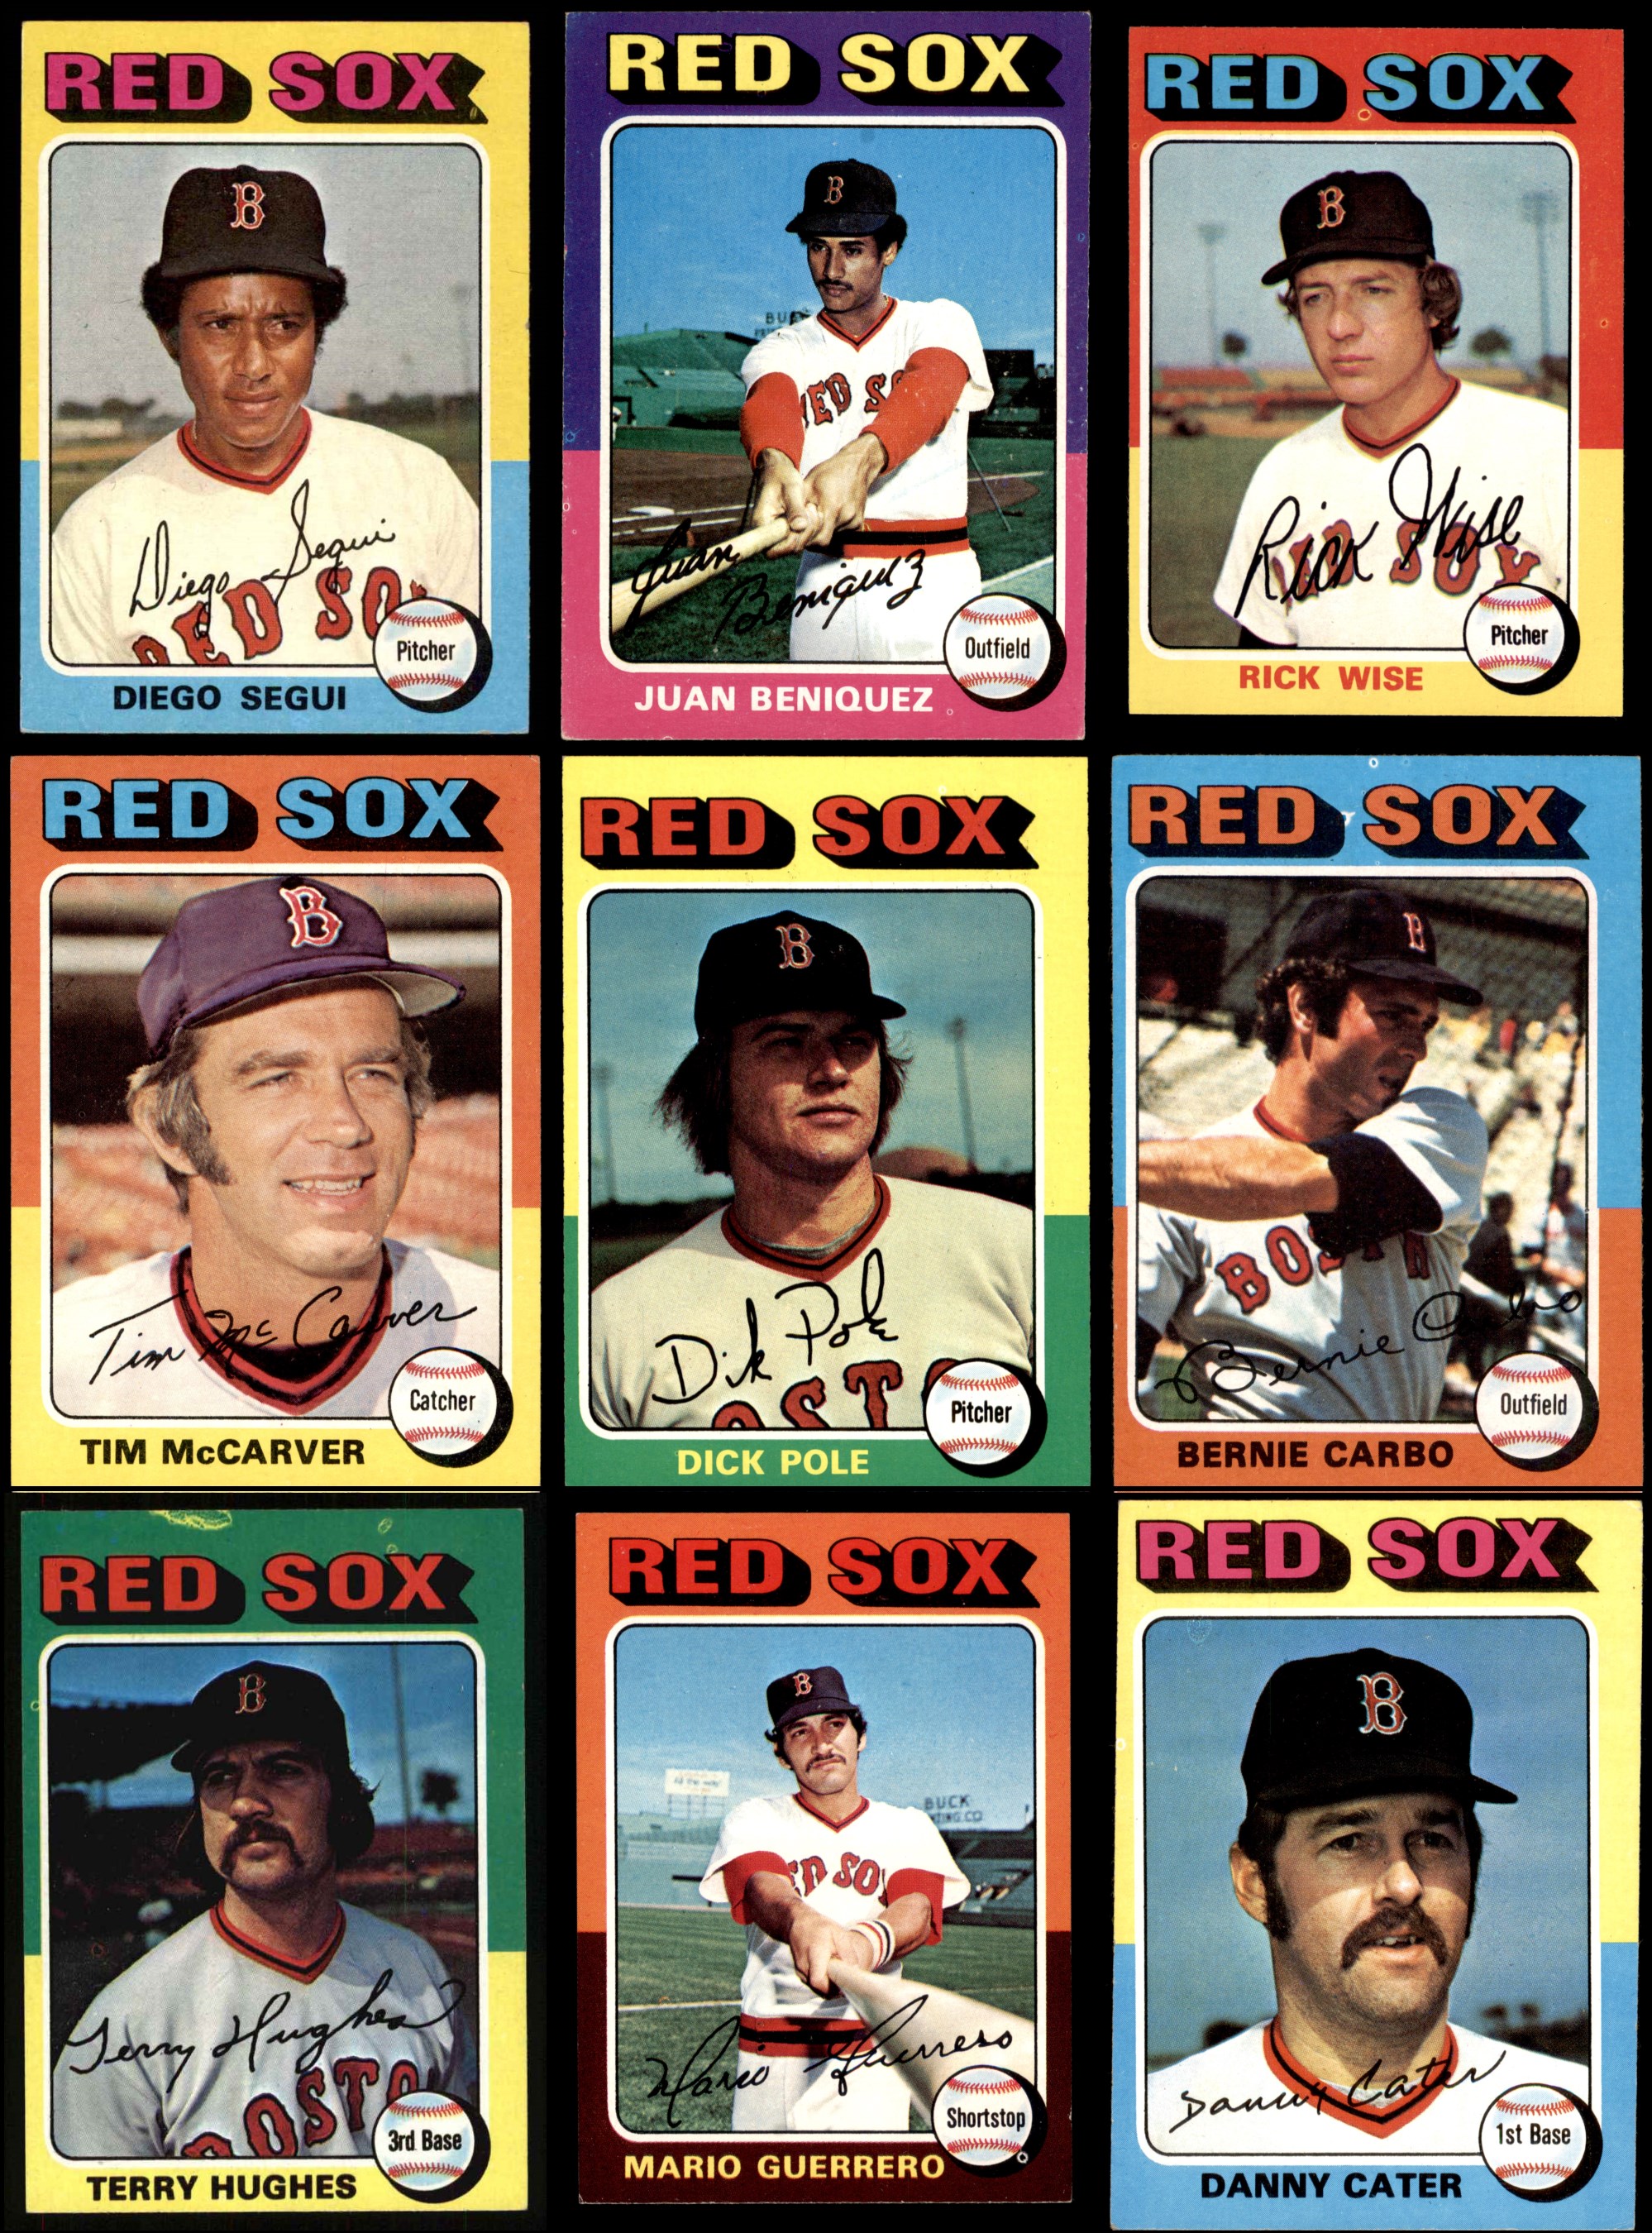 1975 red sox roster